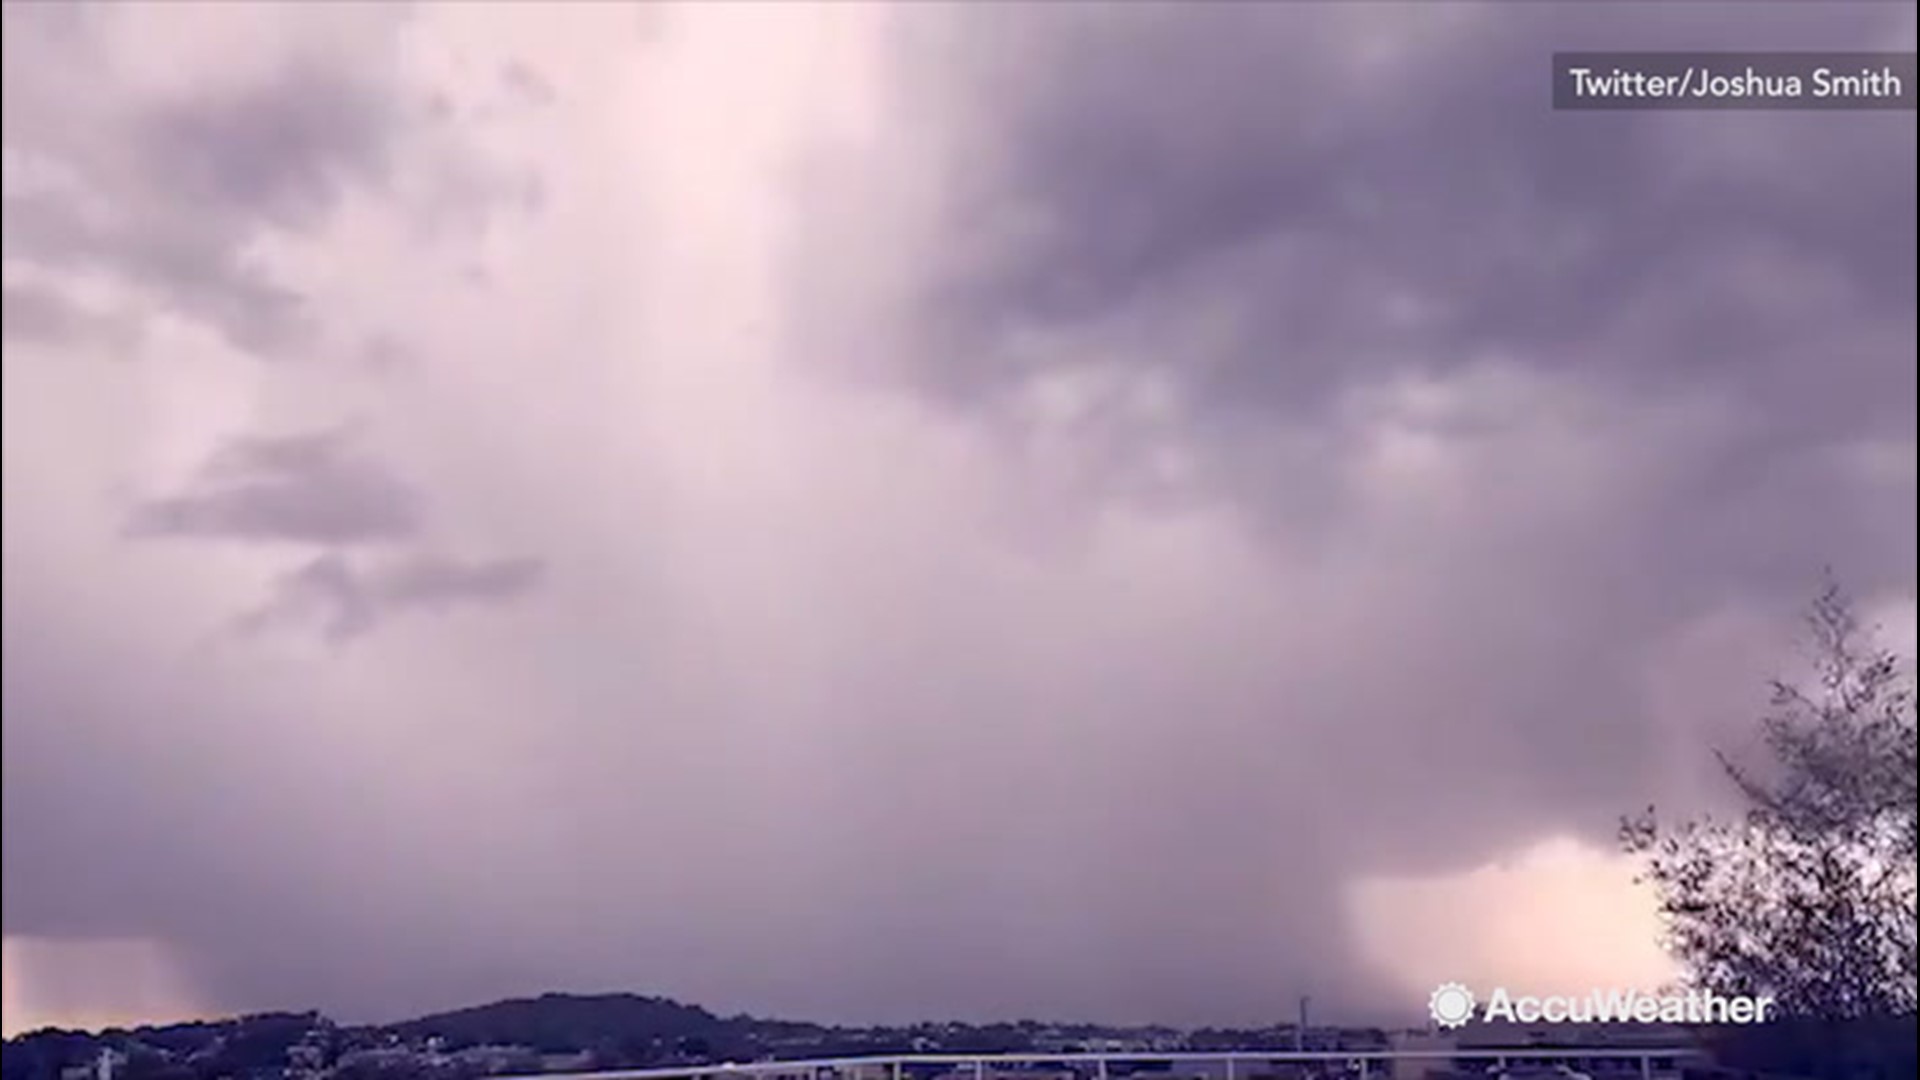 Check out this time lapse of a wall of rain creeping over northeastern Washington DC on July 17.